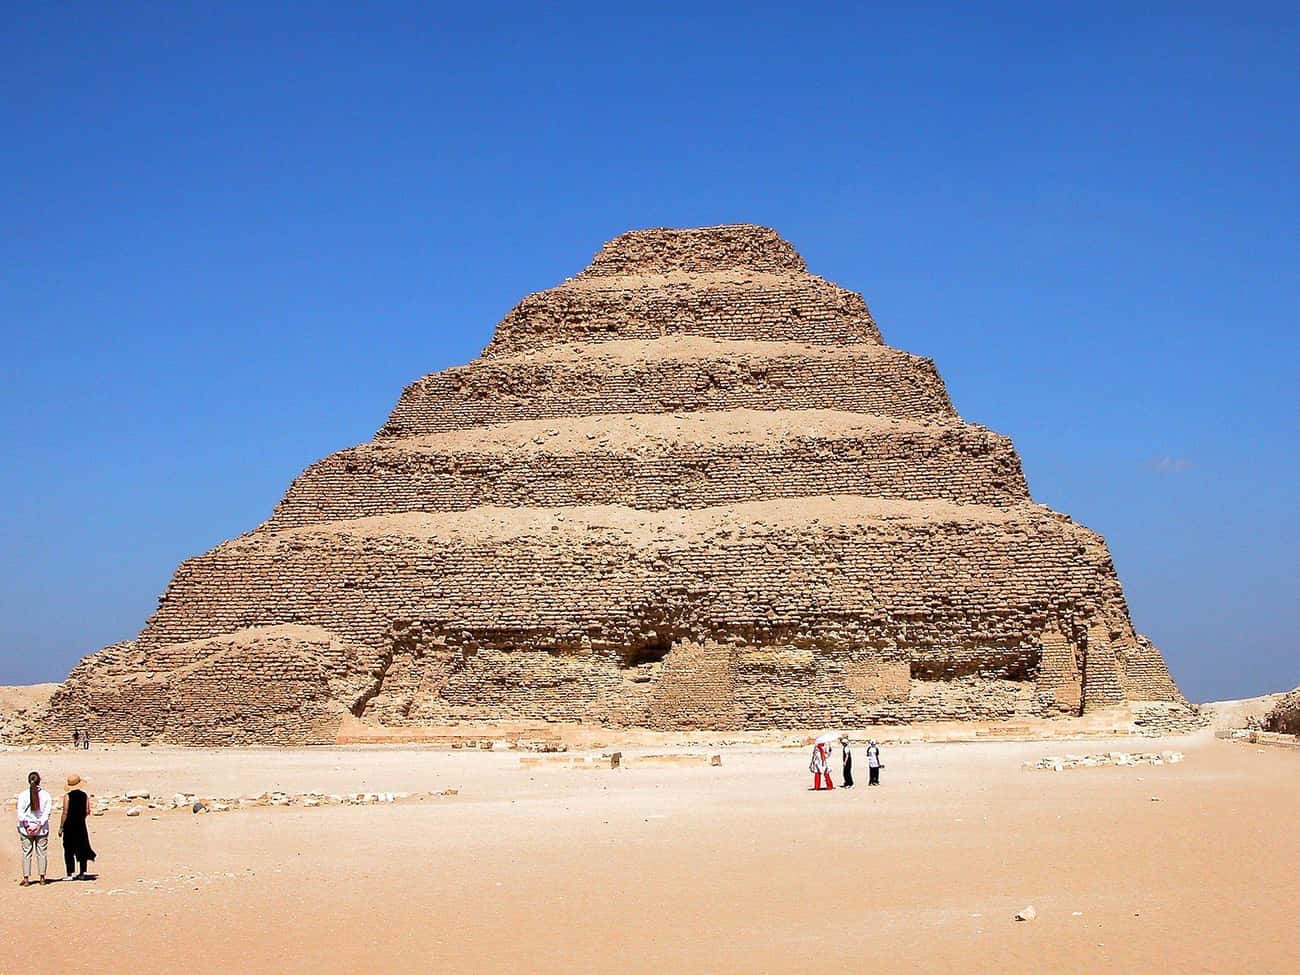 Built In 2630 BCE, The 4,700 Year-Old Step Pyramid Of Djoser Is Egypt's Oldest Pyramid